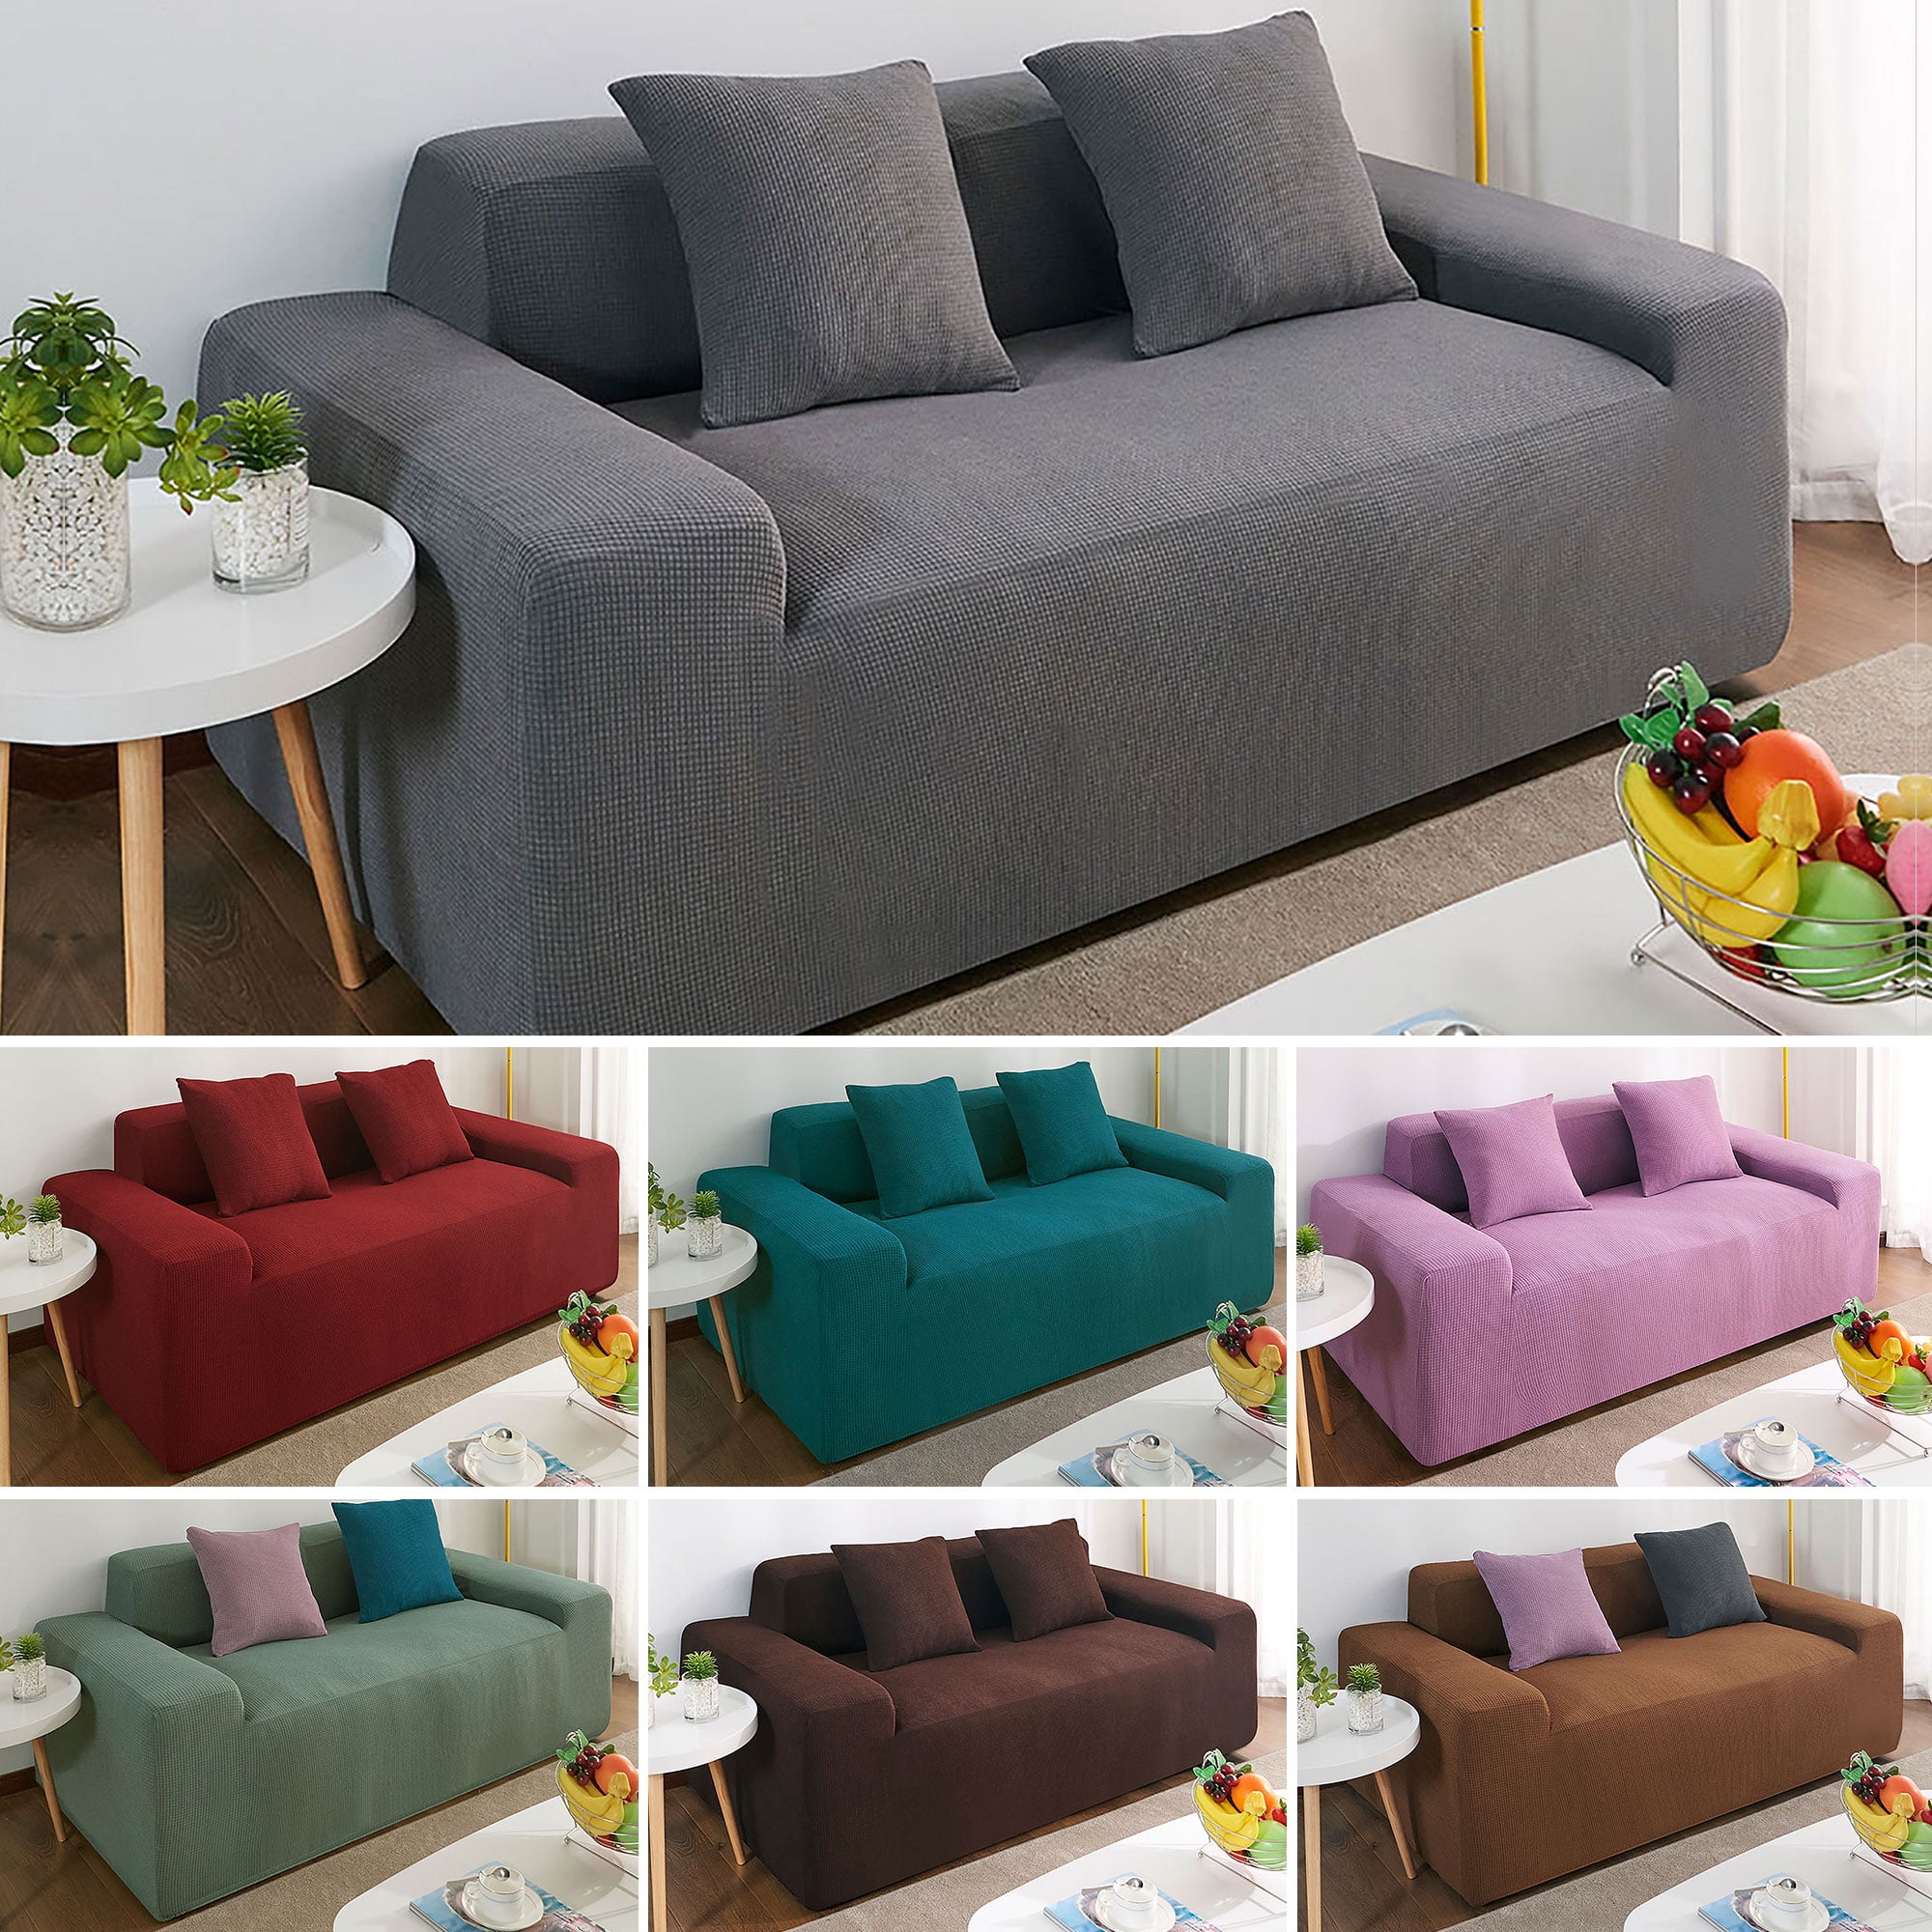 1/2/3/4 Seat Stretch Sofa Cover Elastic Slipcover Protector Spandex Sofa Couch 